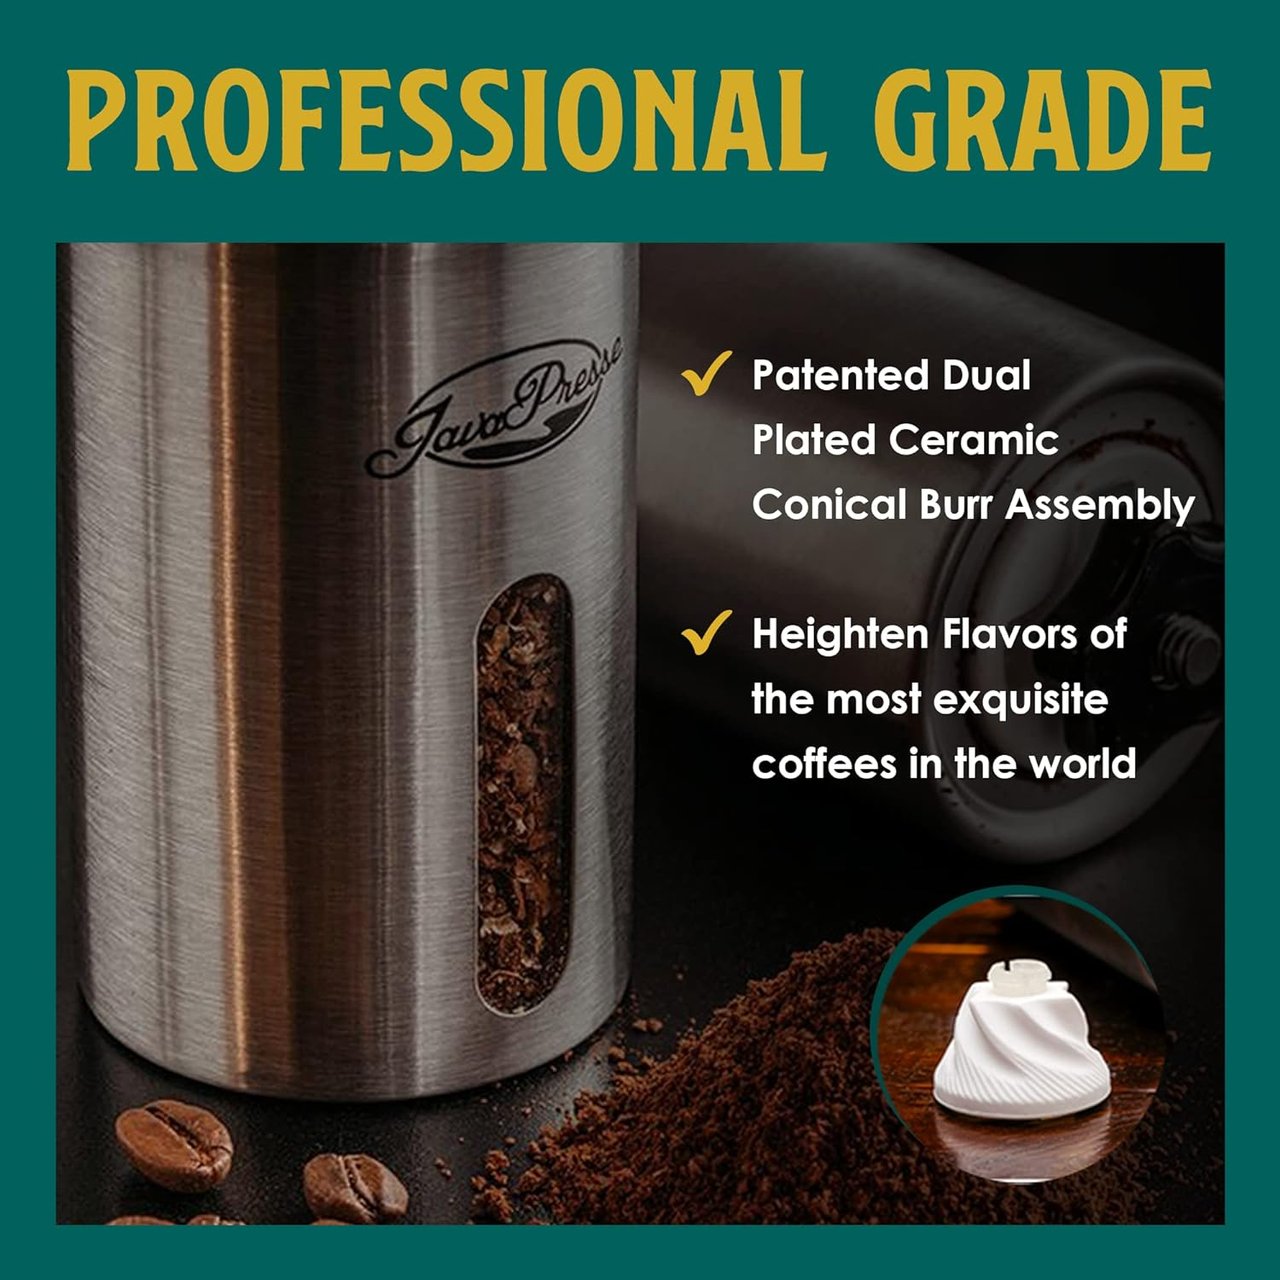 1 JavaPresse's Manual Coffee Grinder - Precision Coffee Bean Grinder with 18 Customizable Grind Levels, Premium Stainless Steel Manual Burr Coffee Grinder with Hand Crank - Exceptional Present, Ideal for Outdoor Adventures.